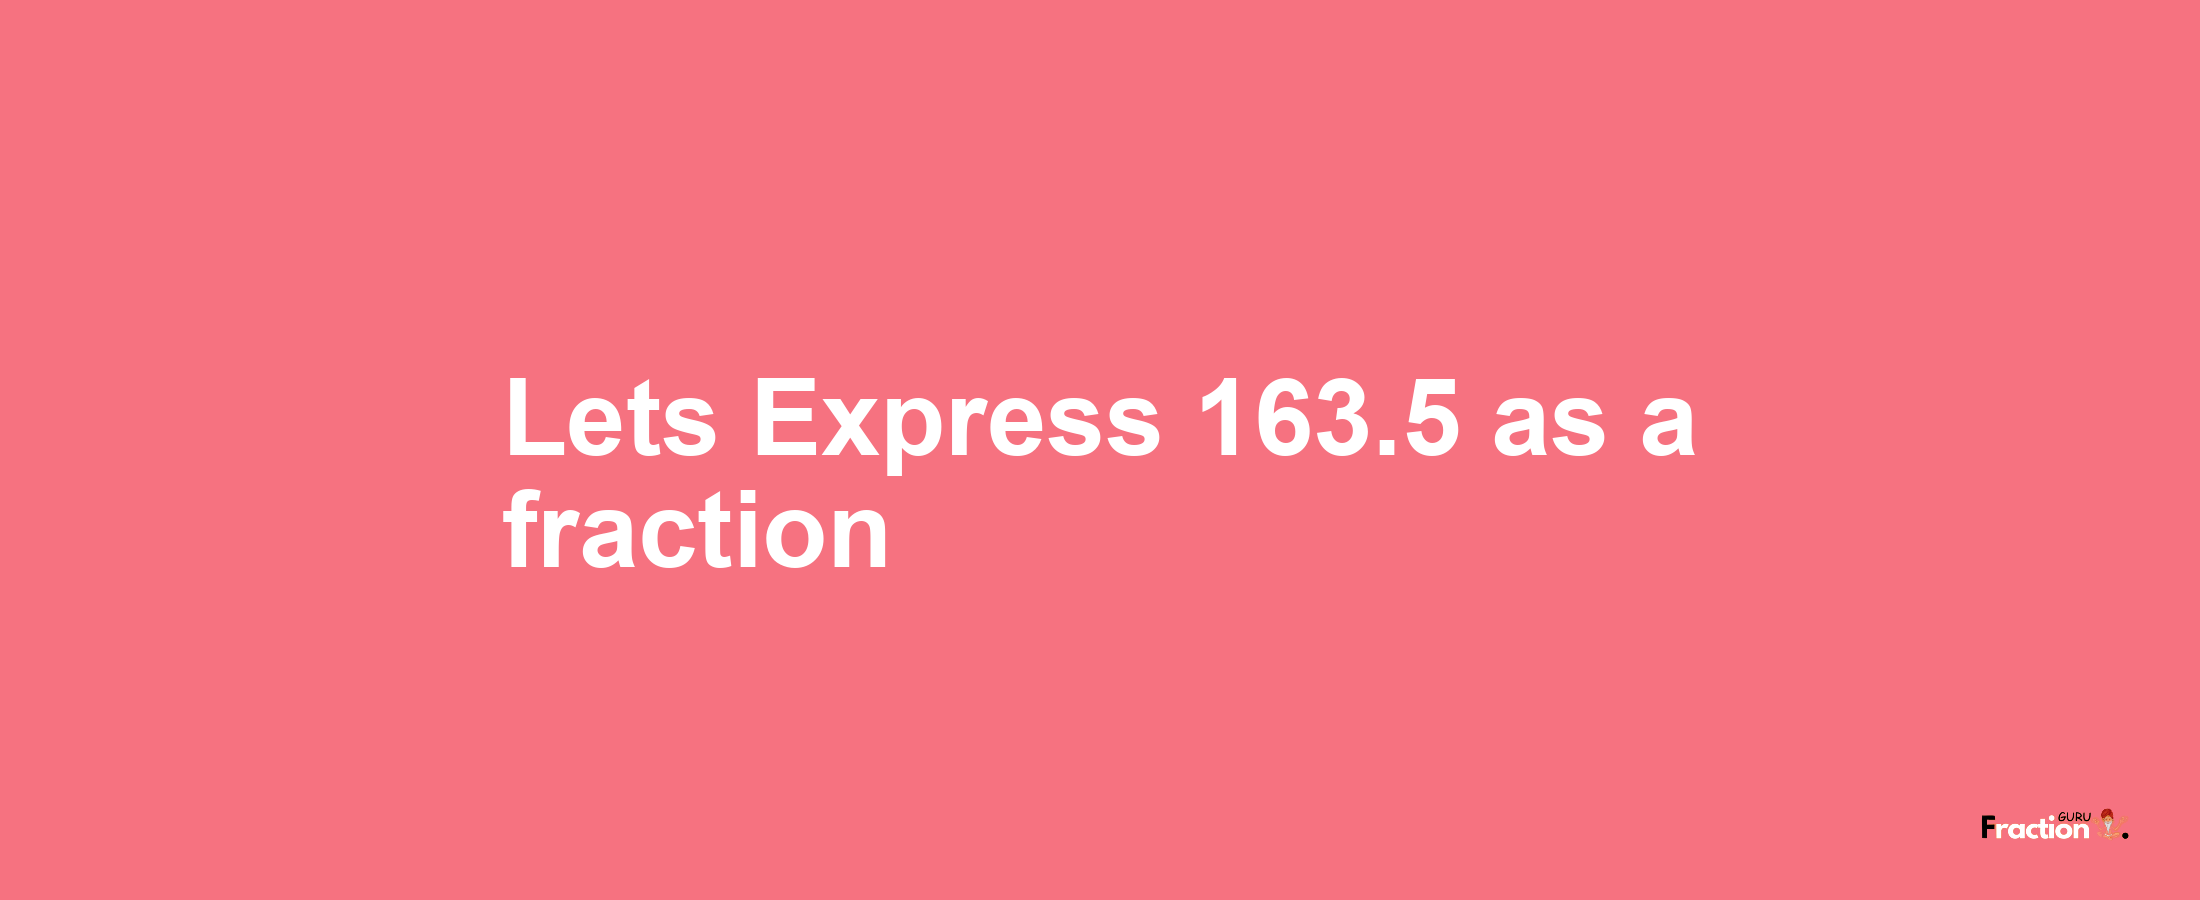 Lets Express 163.5 as afraction